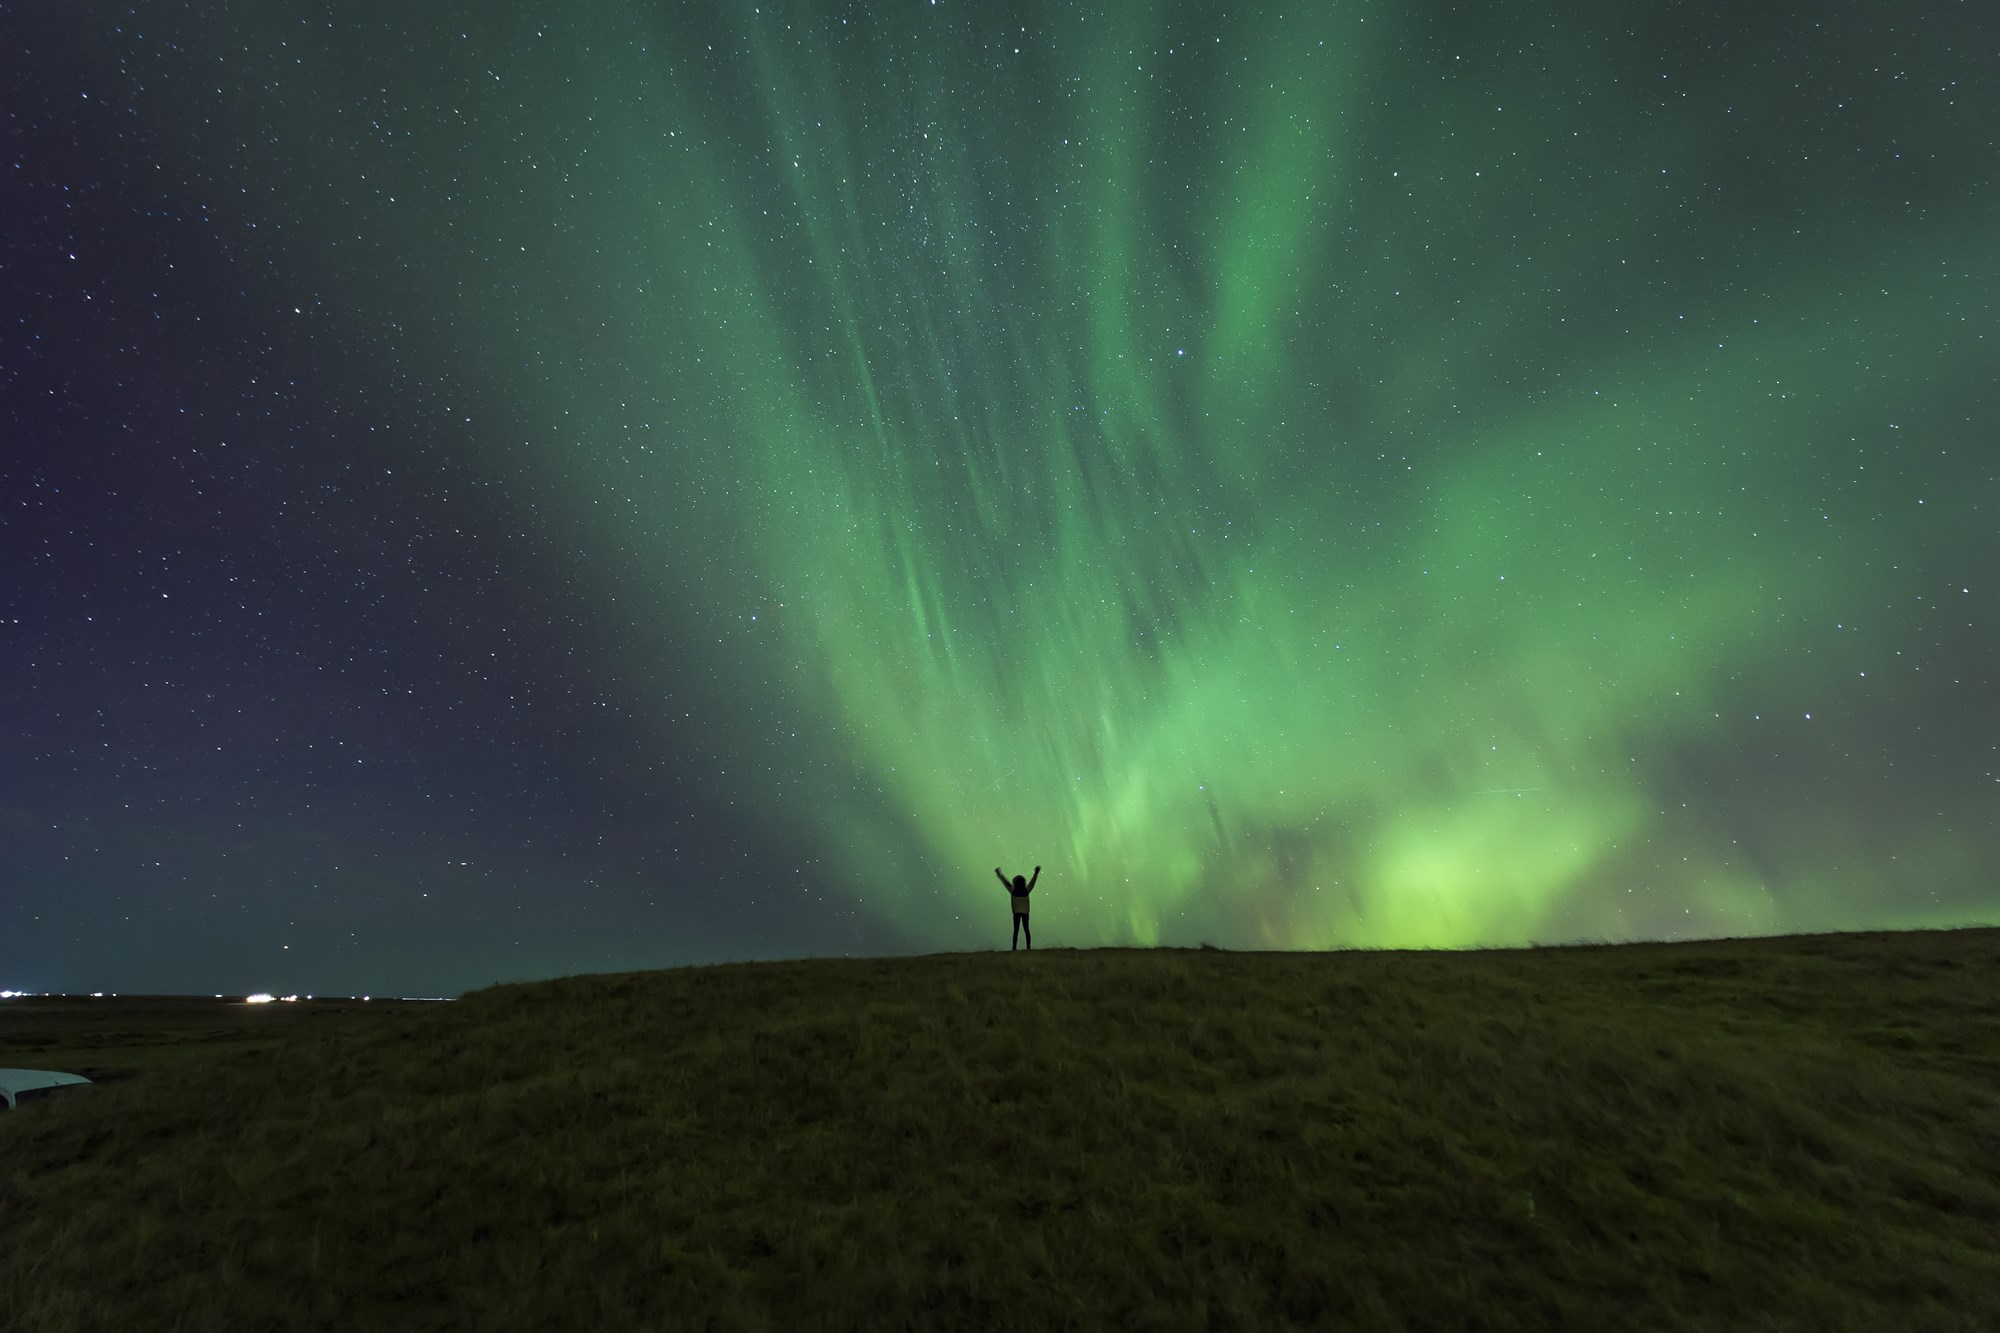 Chasing northern lights in Iceland is a memorable experience